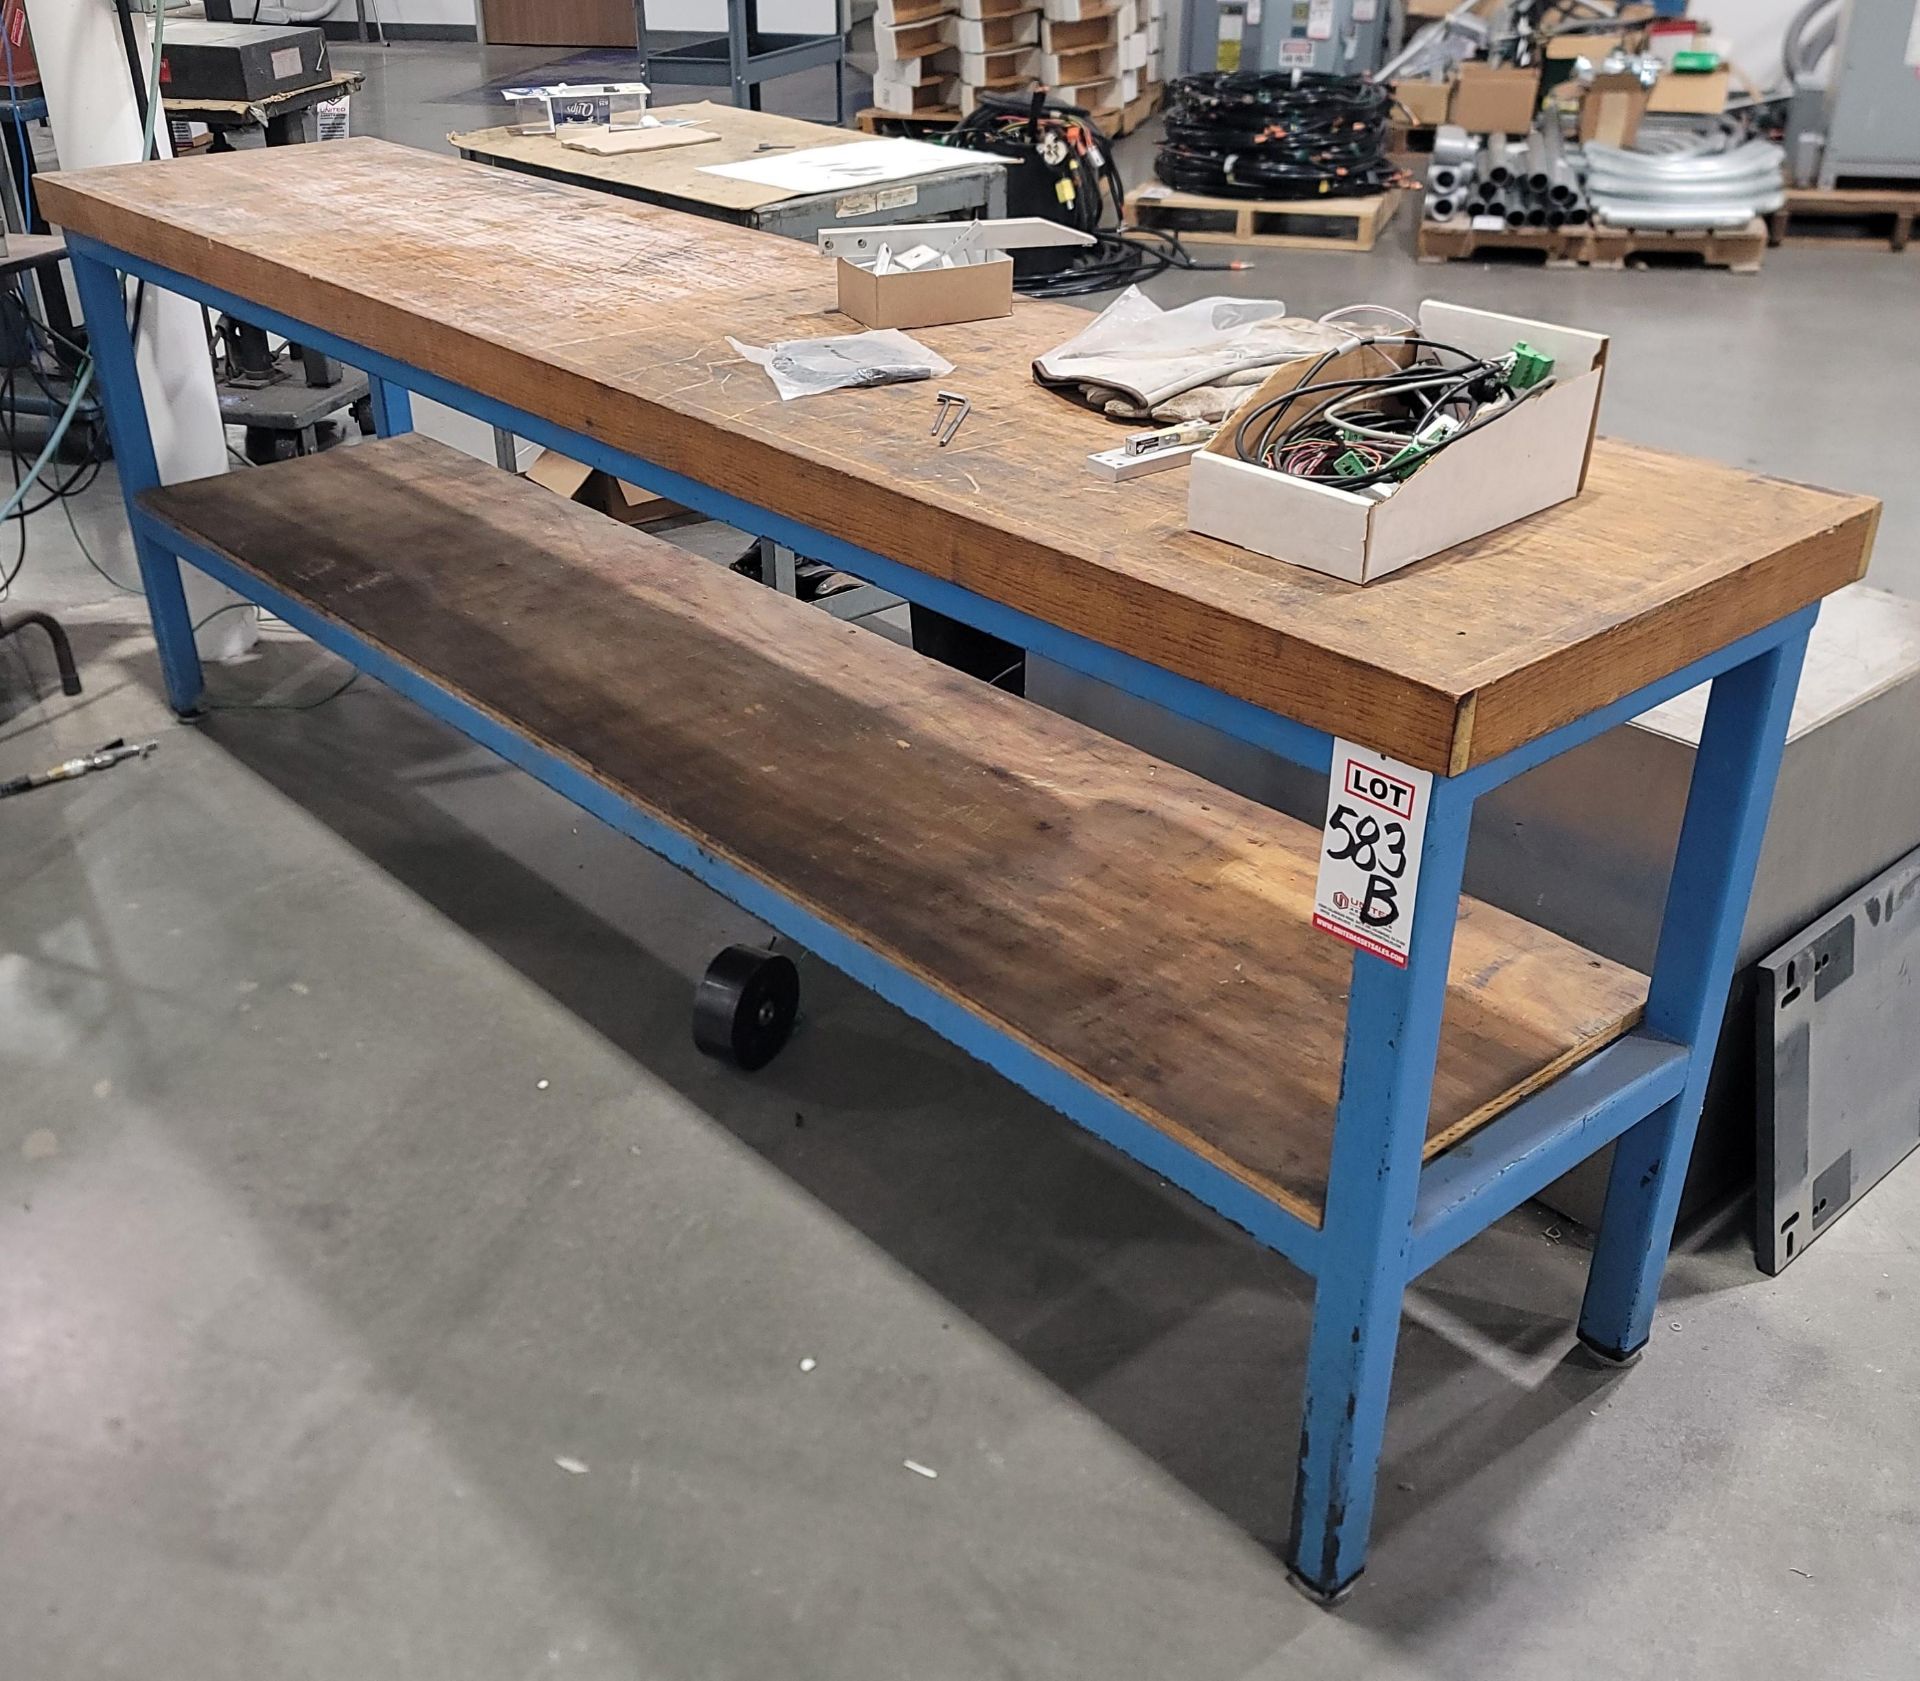 STEEL TABLE W/ 8' X 21" WOOD TOP, CONTENTS NOT INCLUDED